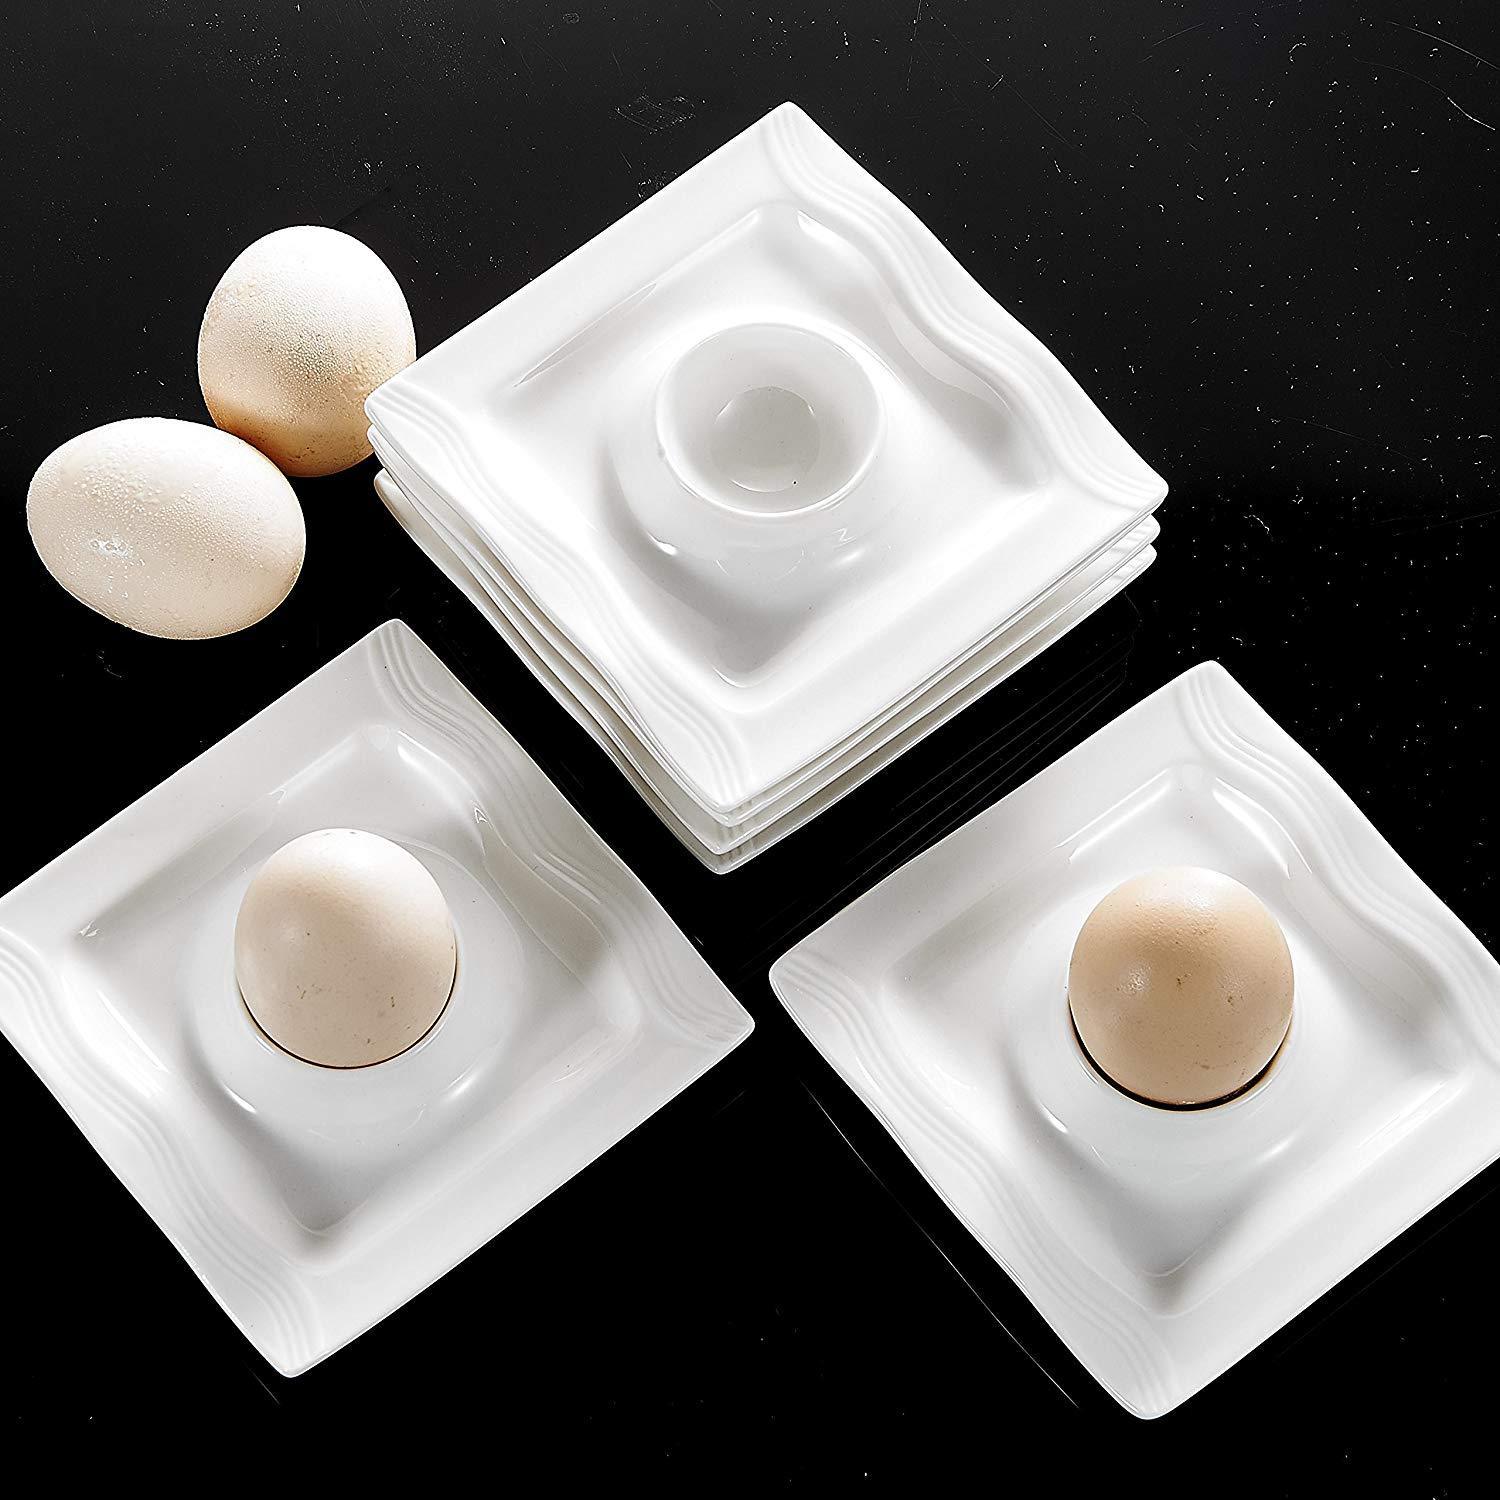 Mario 6-Piece 4.5"  Ivory White Porcelain Egg Cups Holder - Nordic Side - 11511525, 45, Ceramic, China, cm, Cream, Cups, Egg, Holder, Ivory, MALACASA, Mario, Piece, Plates, Porcelain, Stand, 